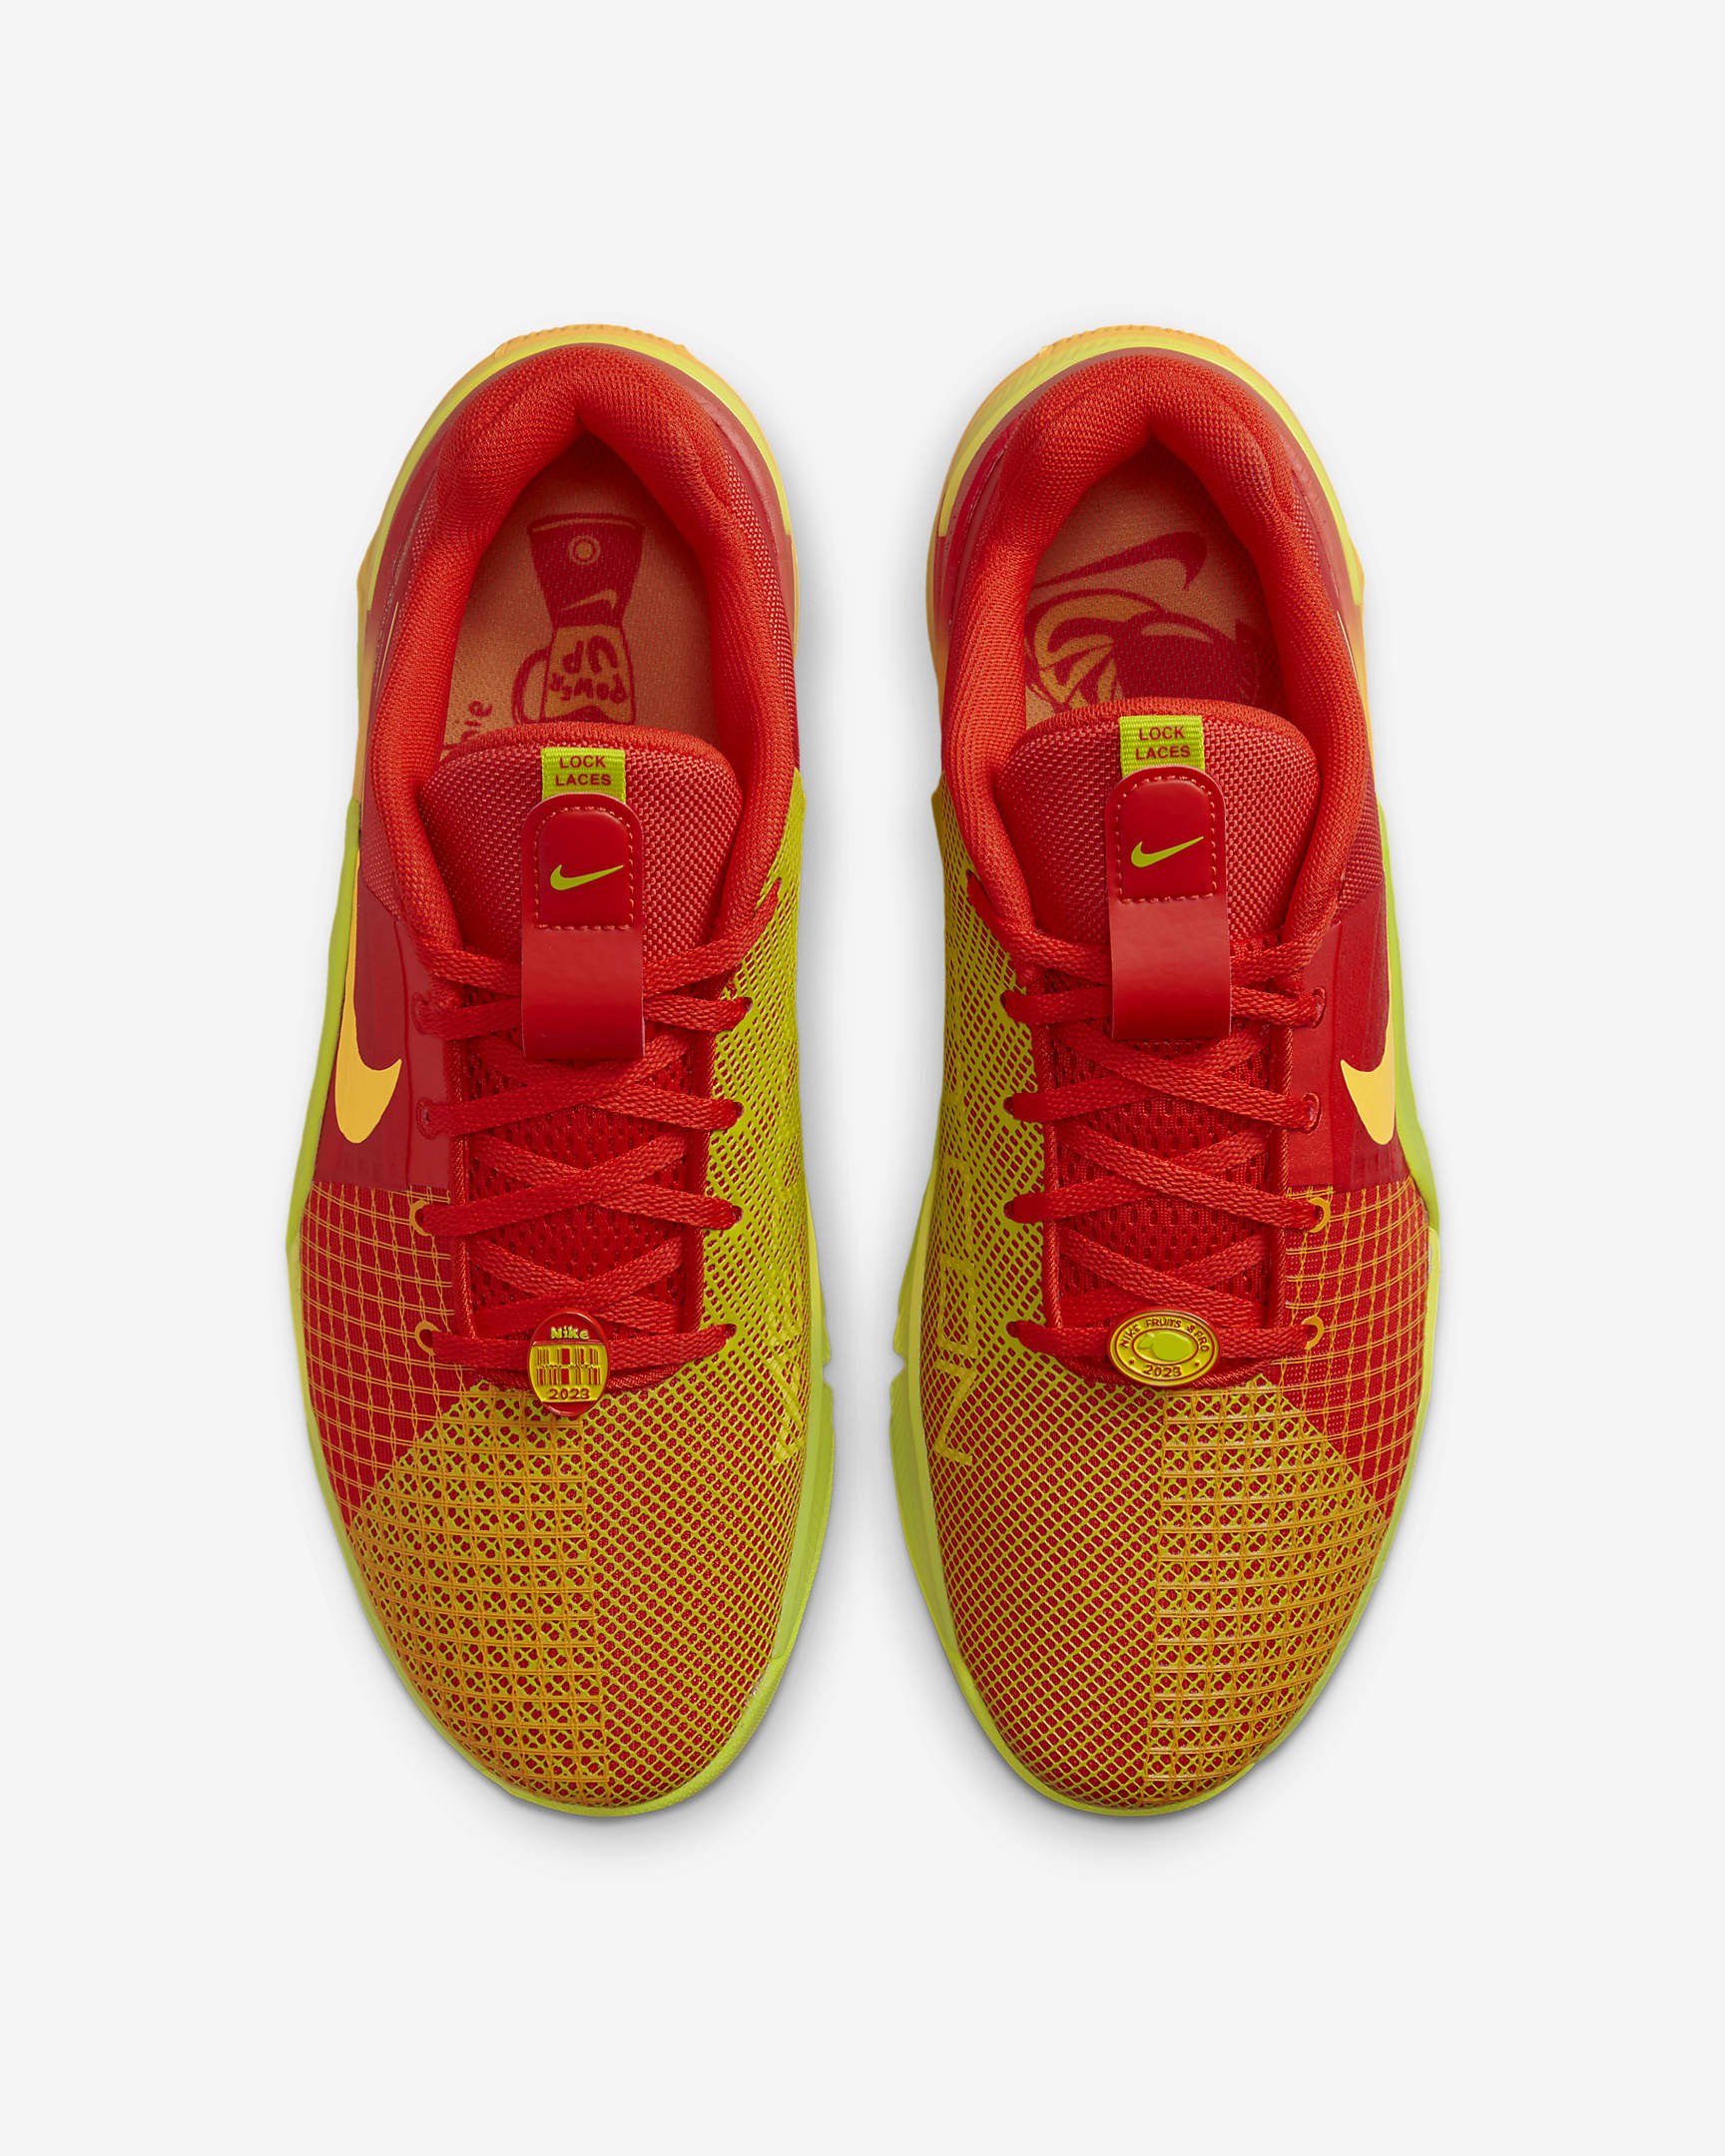 EXCLUSIVE Nike Metcon 8 AMP Review: The Secret to Crushing Your Fitness Goals!